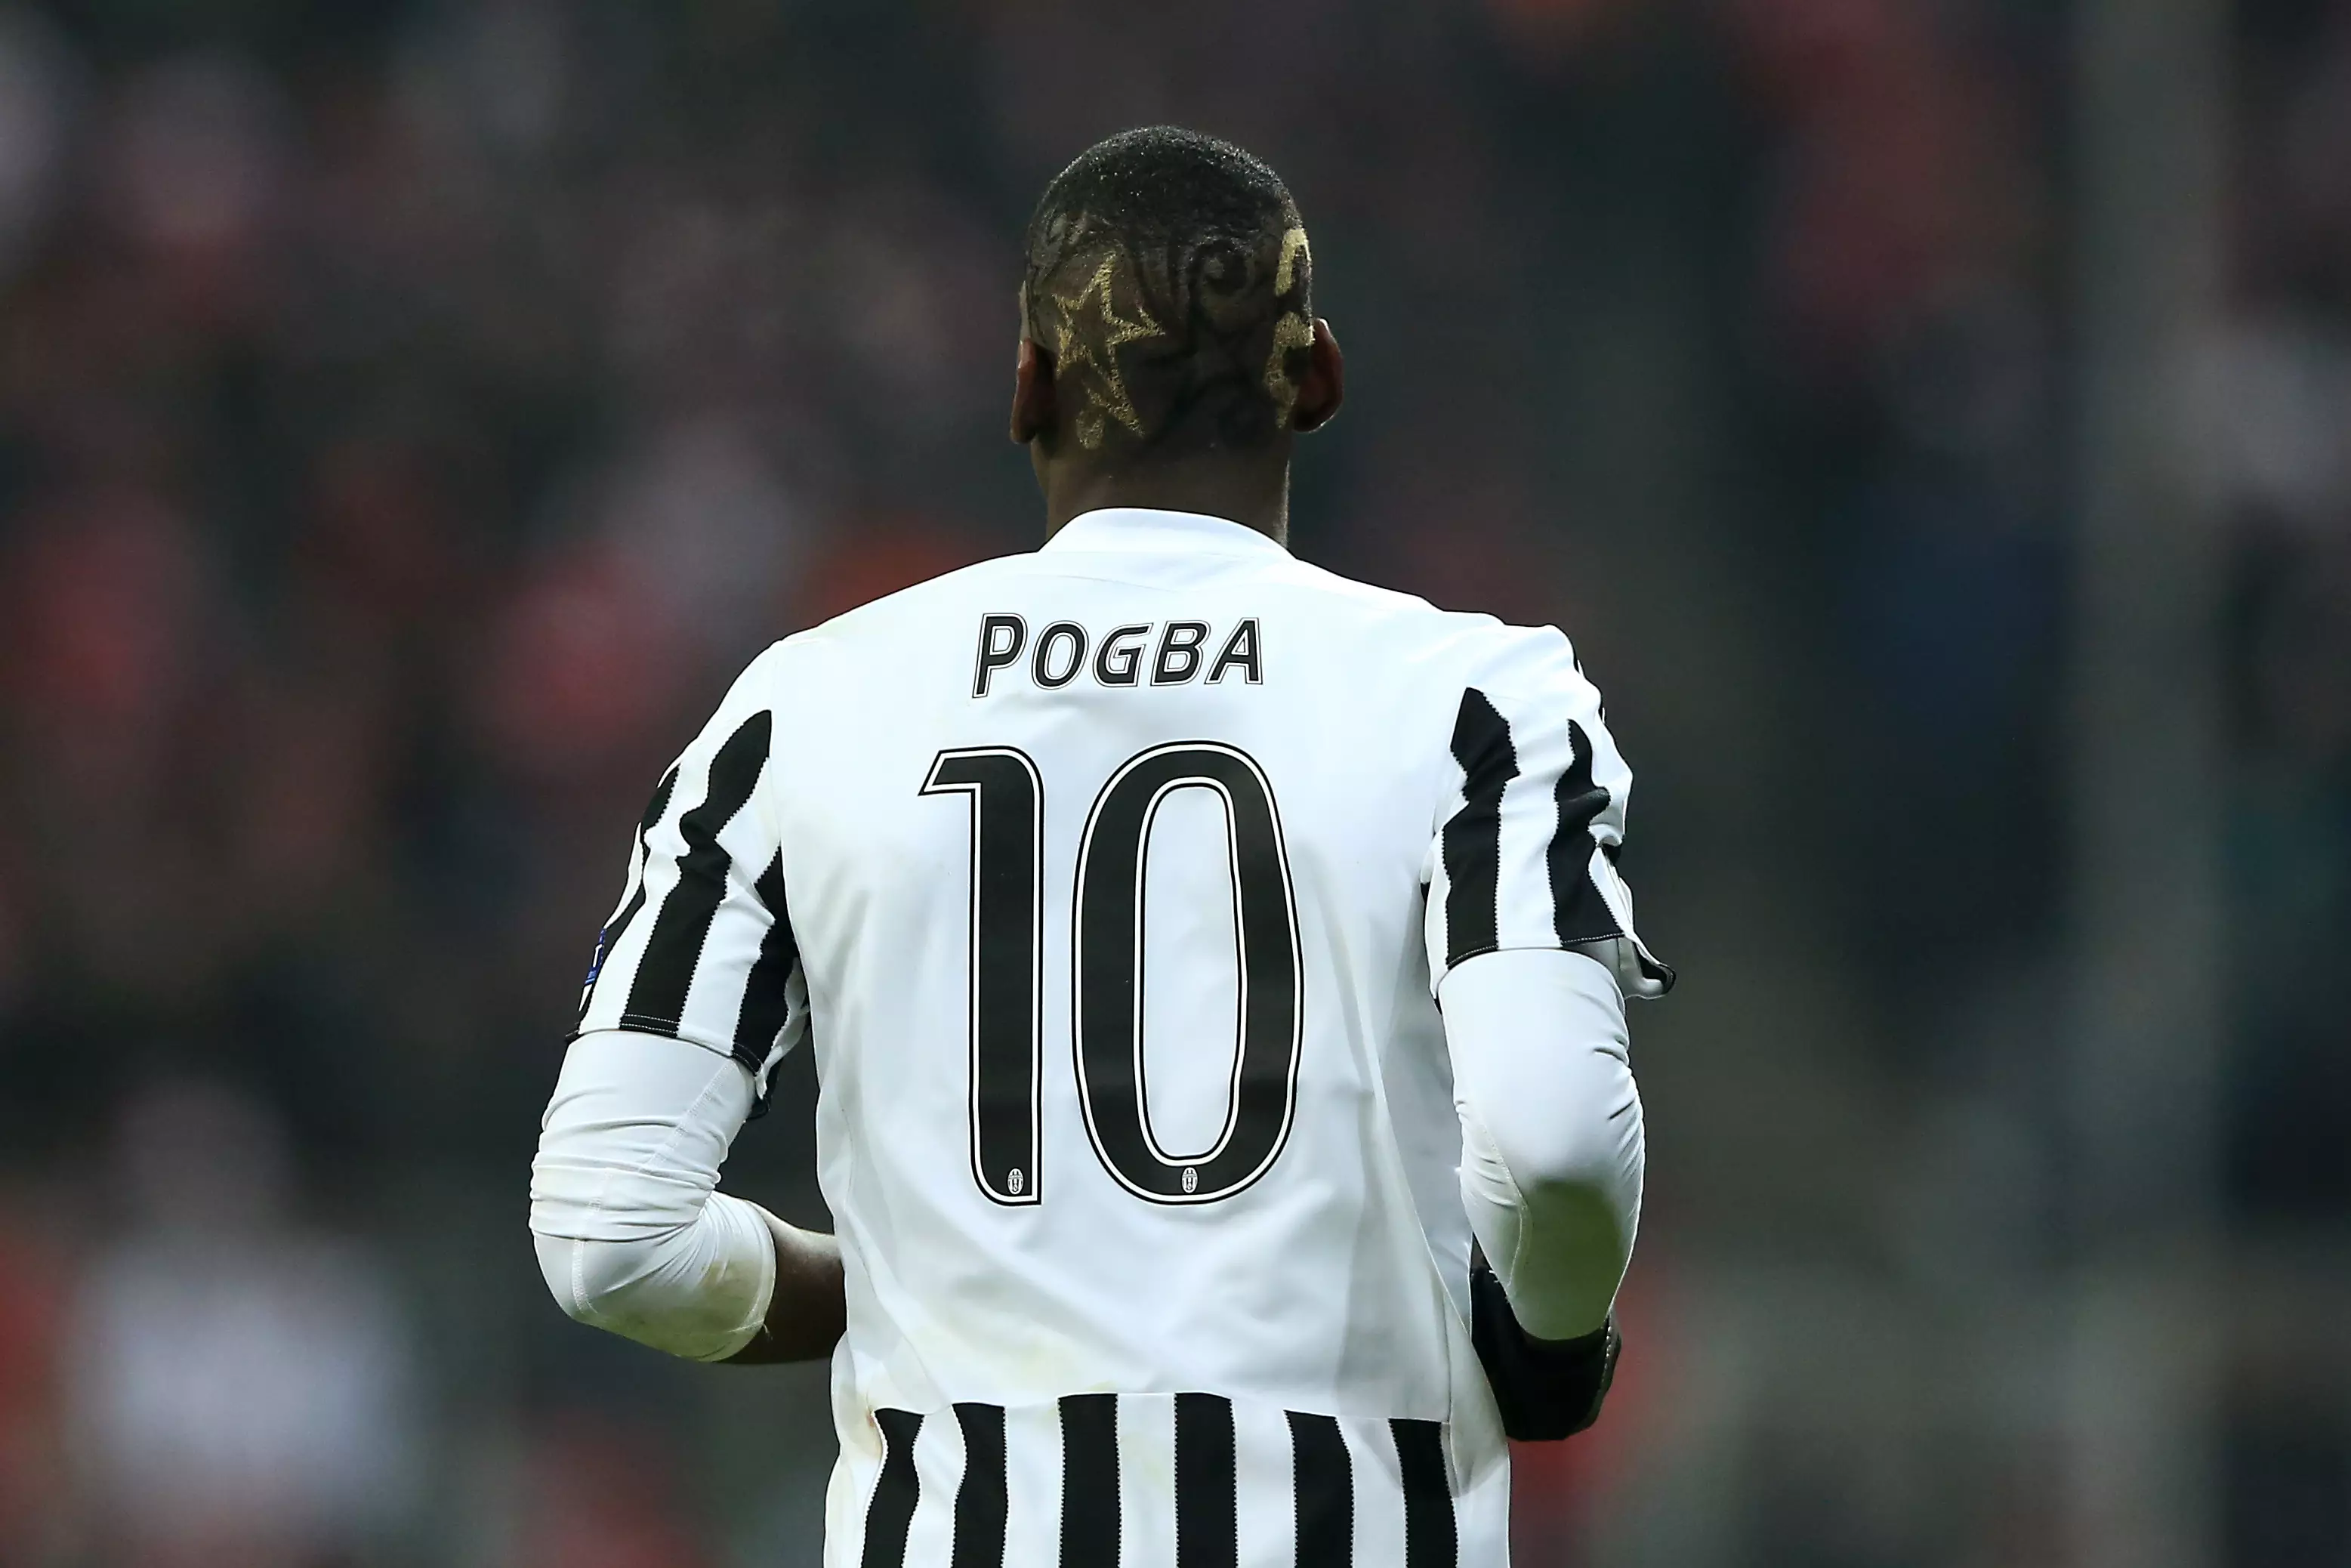 Pogba has been linked with a return to Juventus. Image: PA Images